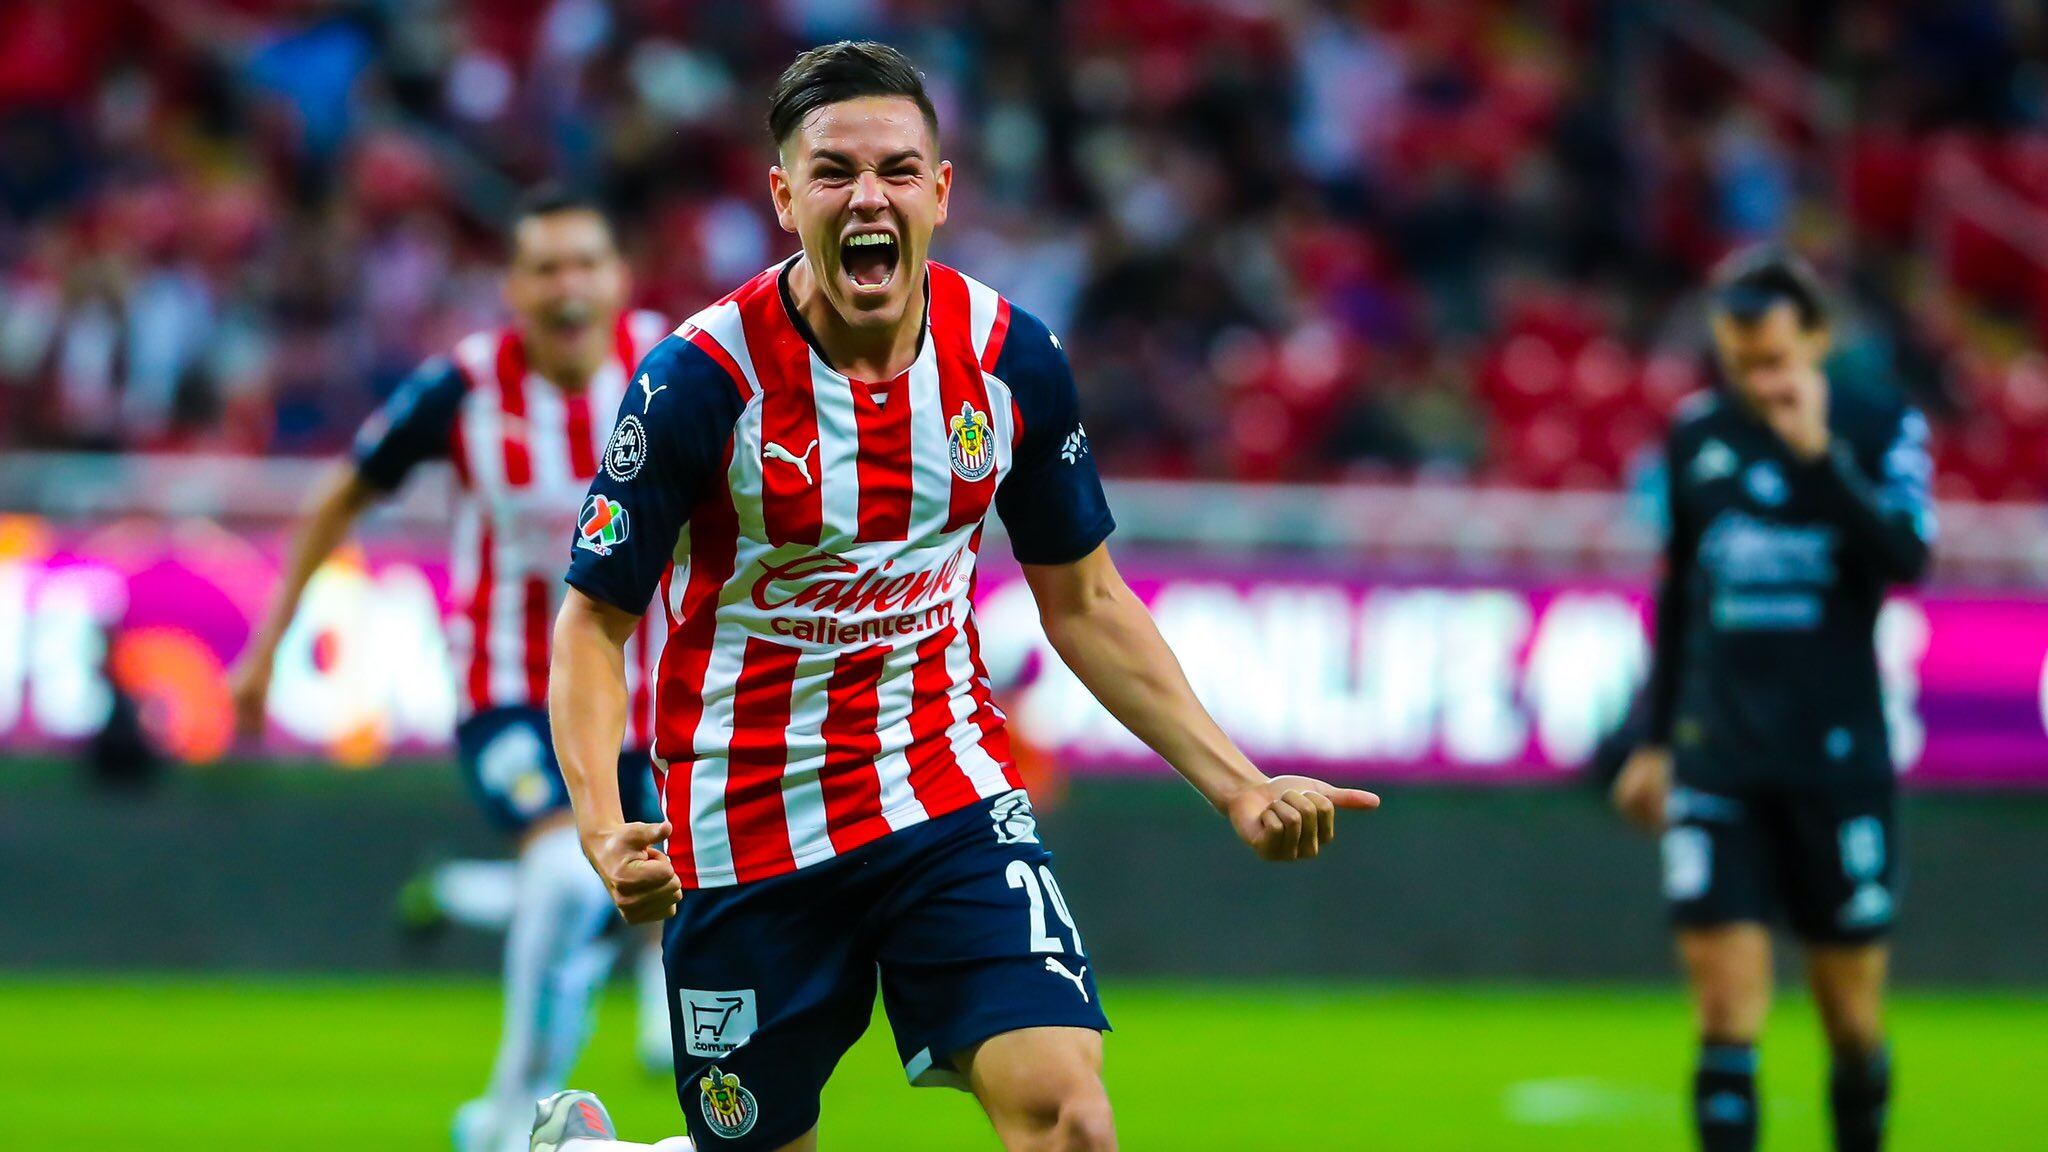 The player that could be what Chivas needed finally scored his first goal with the team